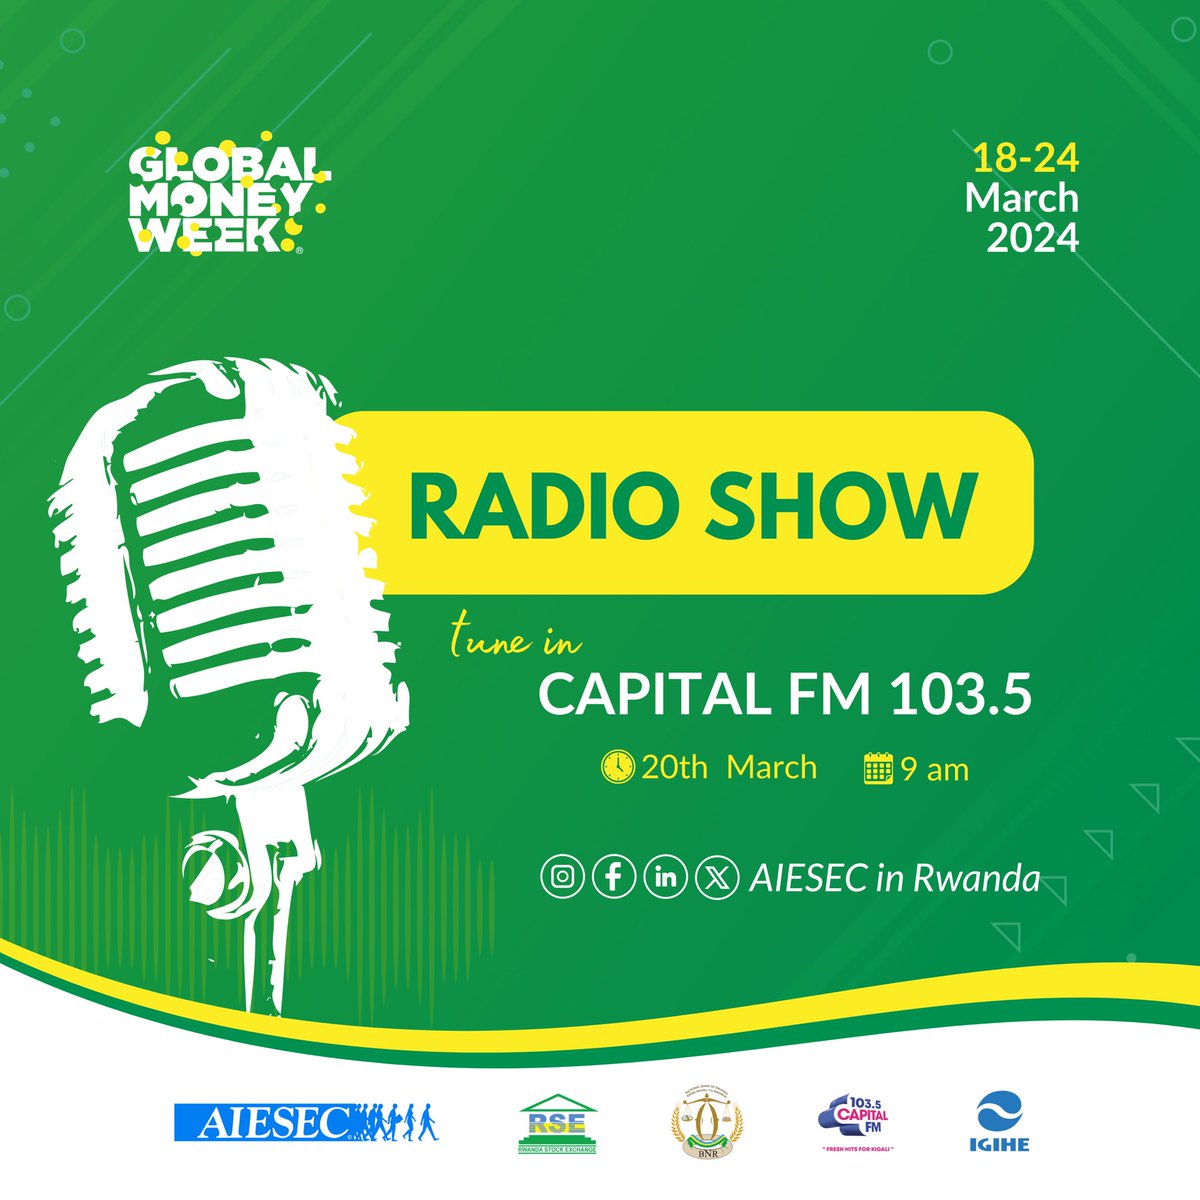 Tune in tomorrow at 10AM to Capital FM 103.5 for an insightful radio show! Joining us are esteemed guests from The National Bank of Rwanda, Rwanda Stock Exchange, Ministry of Finance, and AIESEC in Rwanda